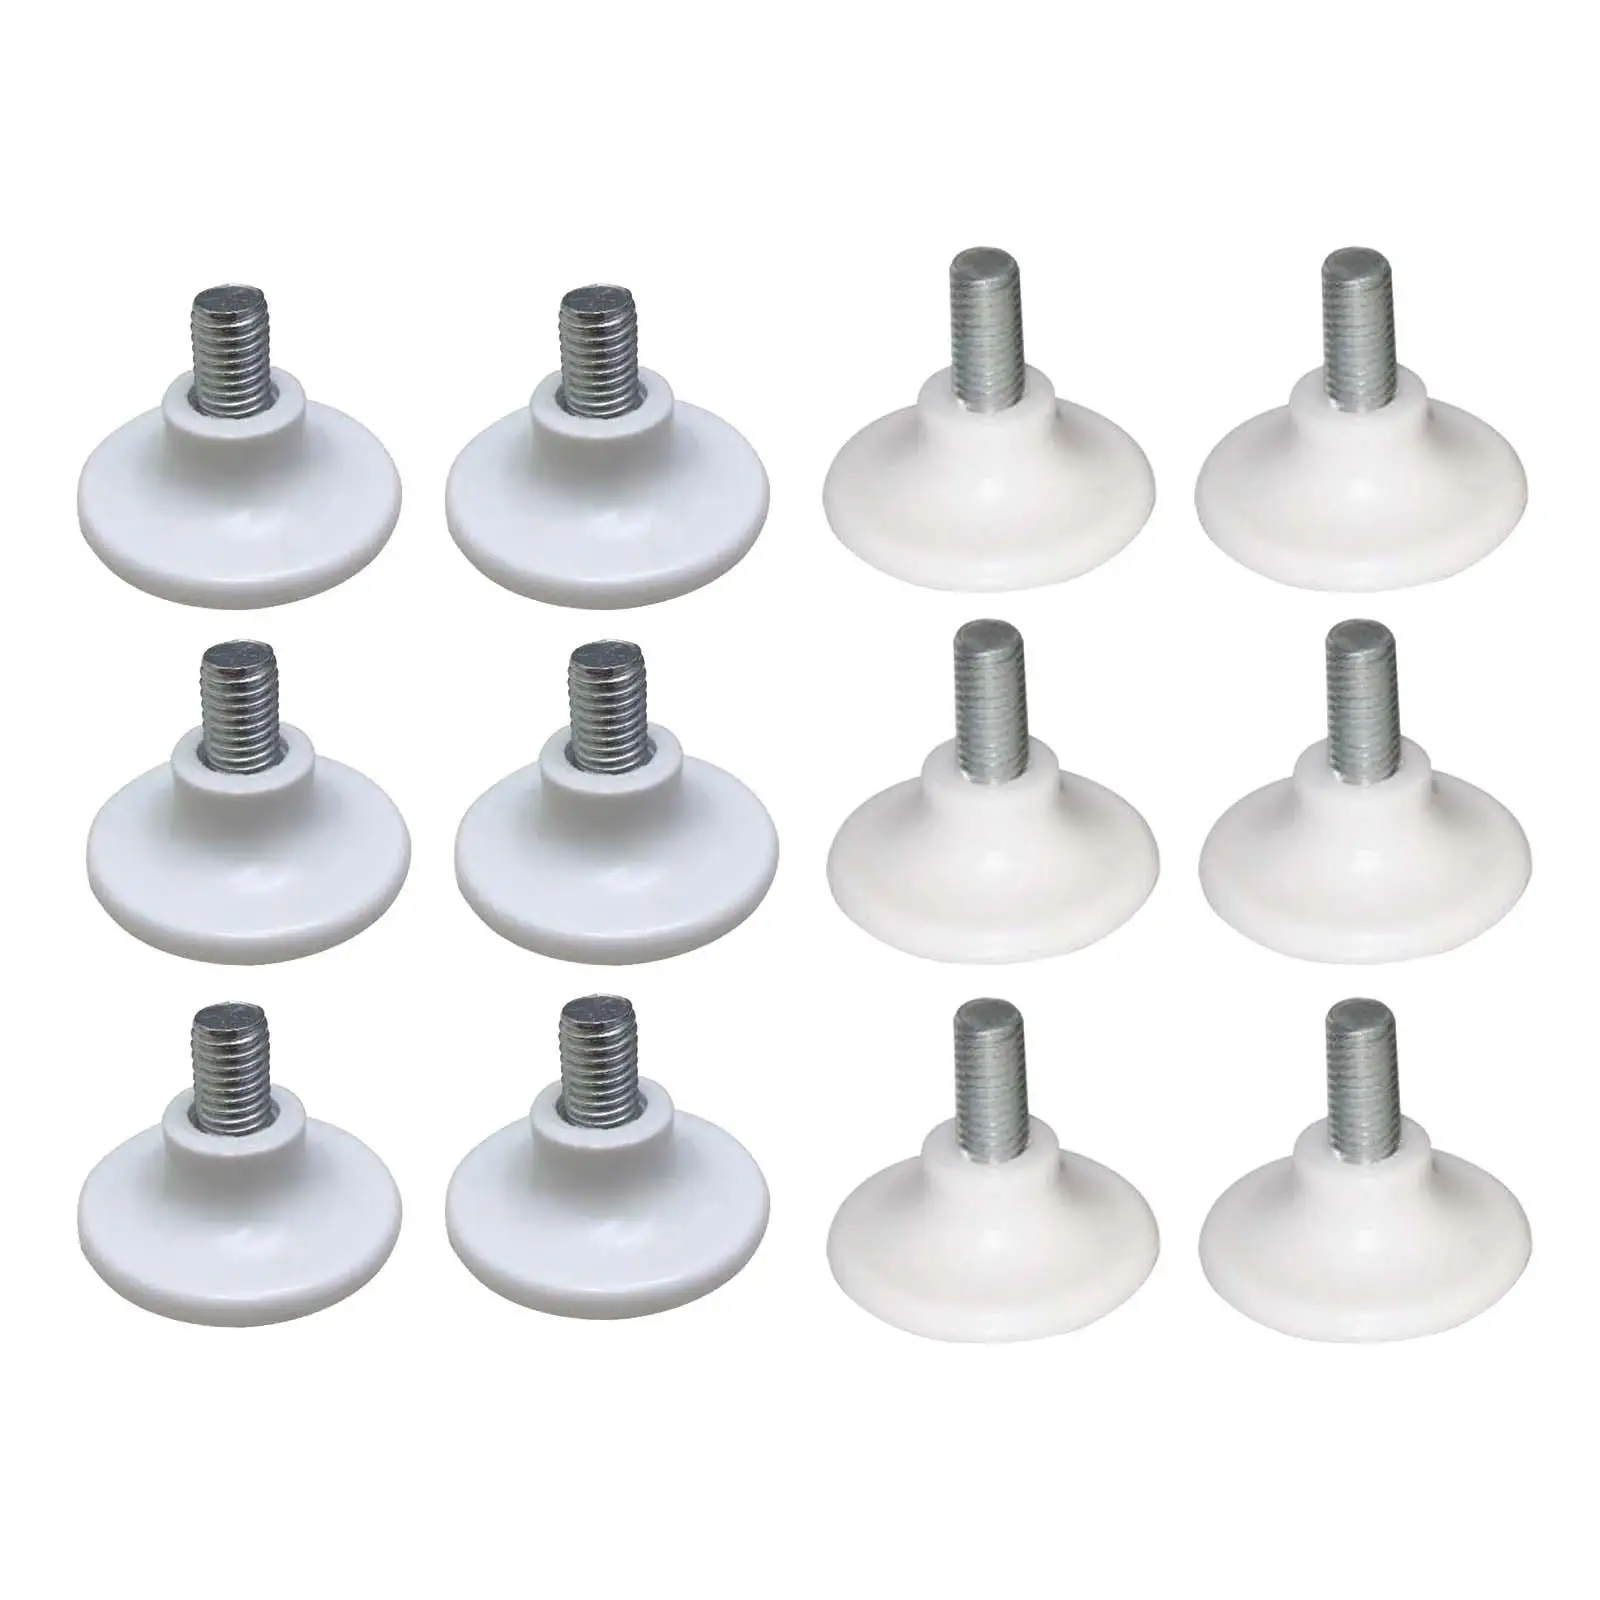 6x Household Furniture Levelers Table Feet Levelers Furniture Glide for Bedroom Kitchen Chair Patio Furniture Cabinet